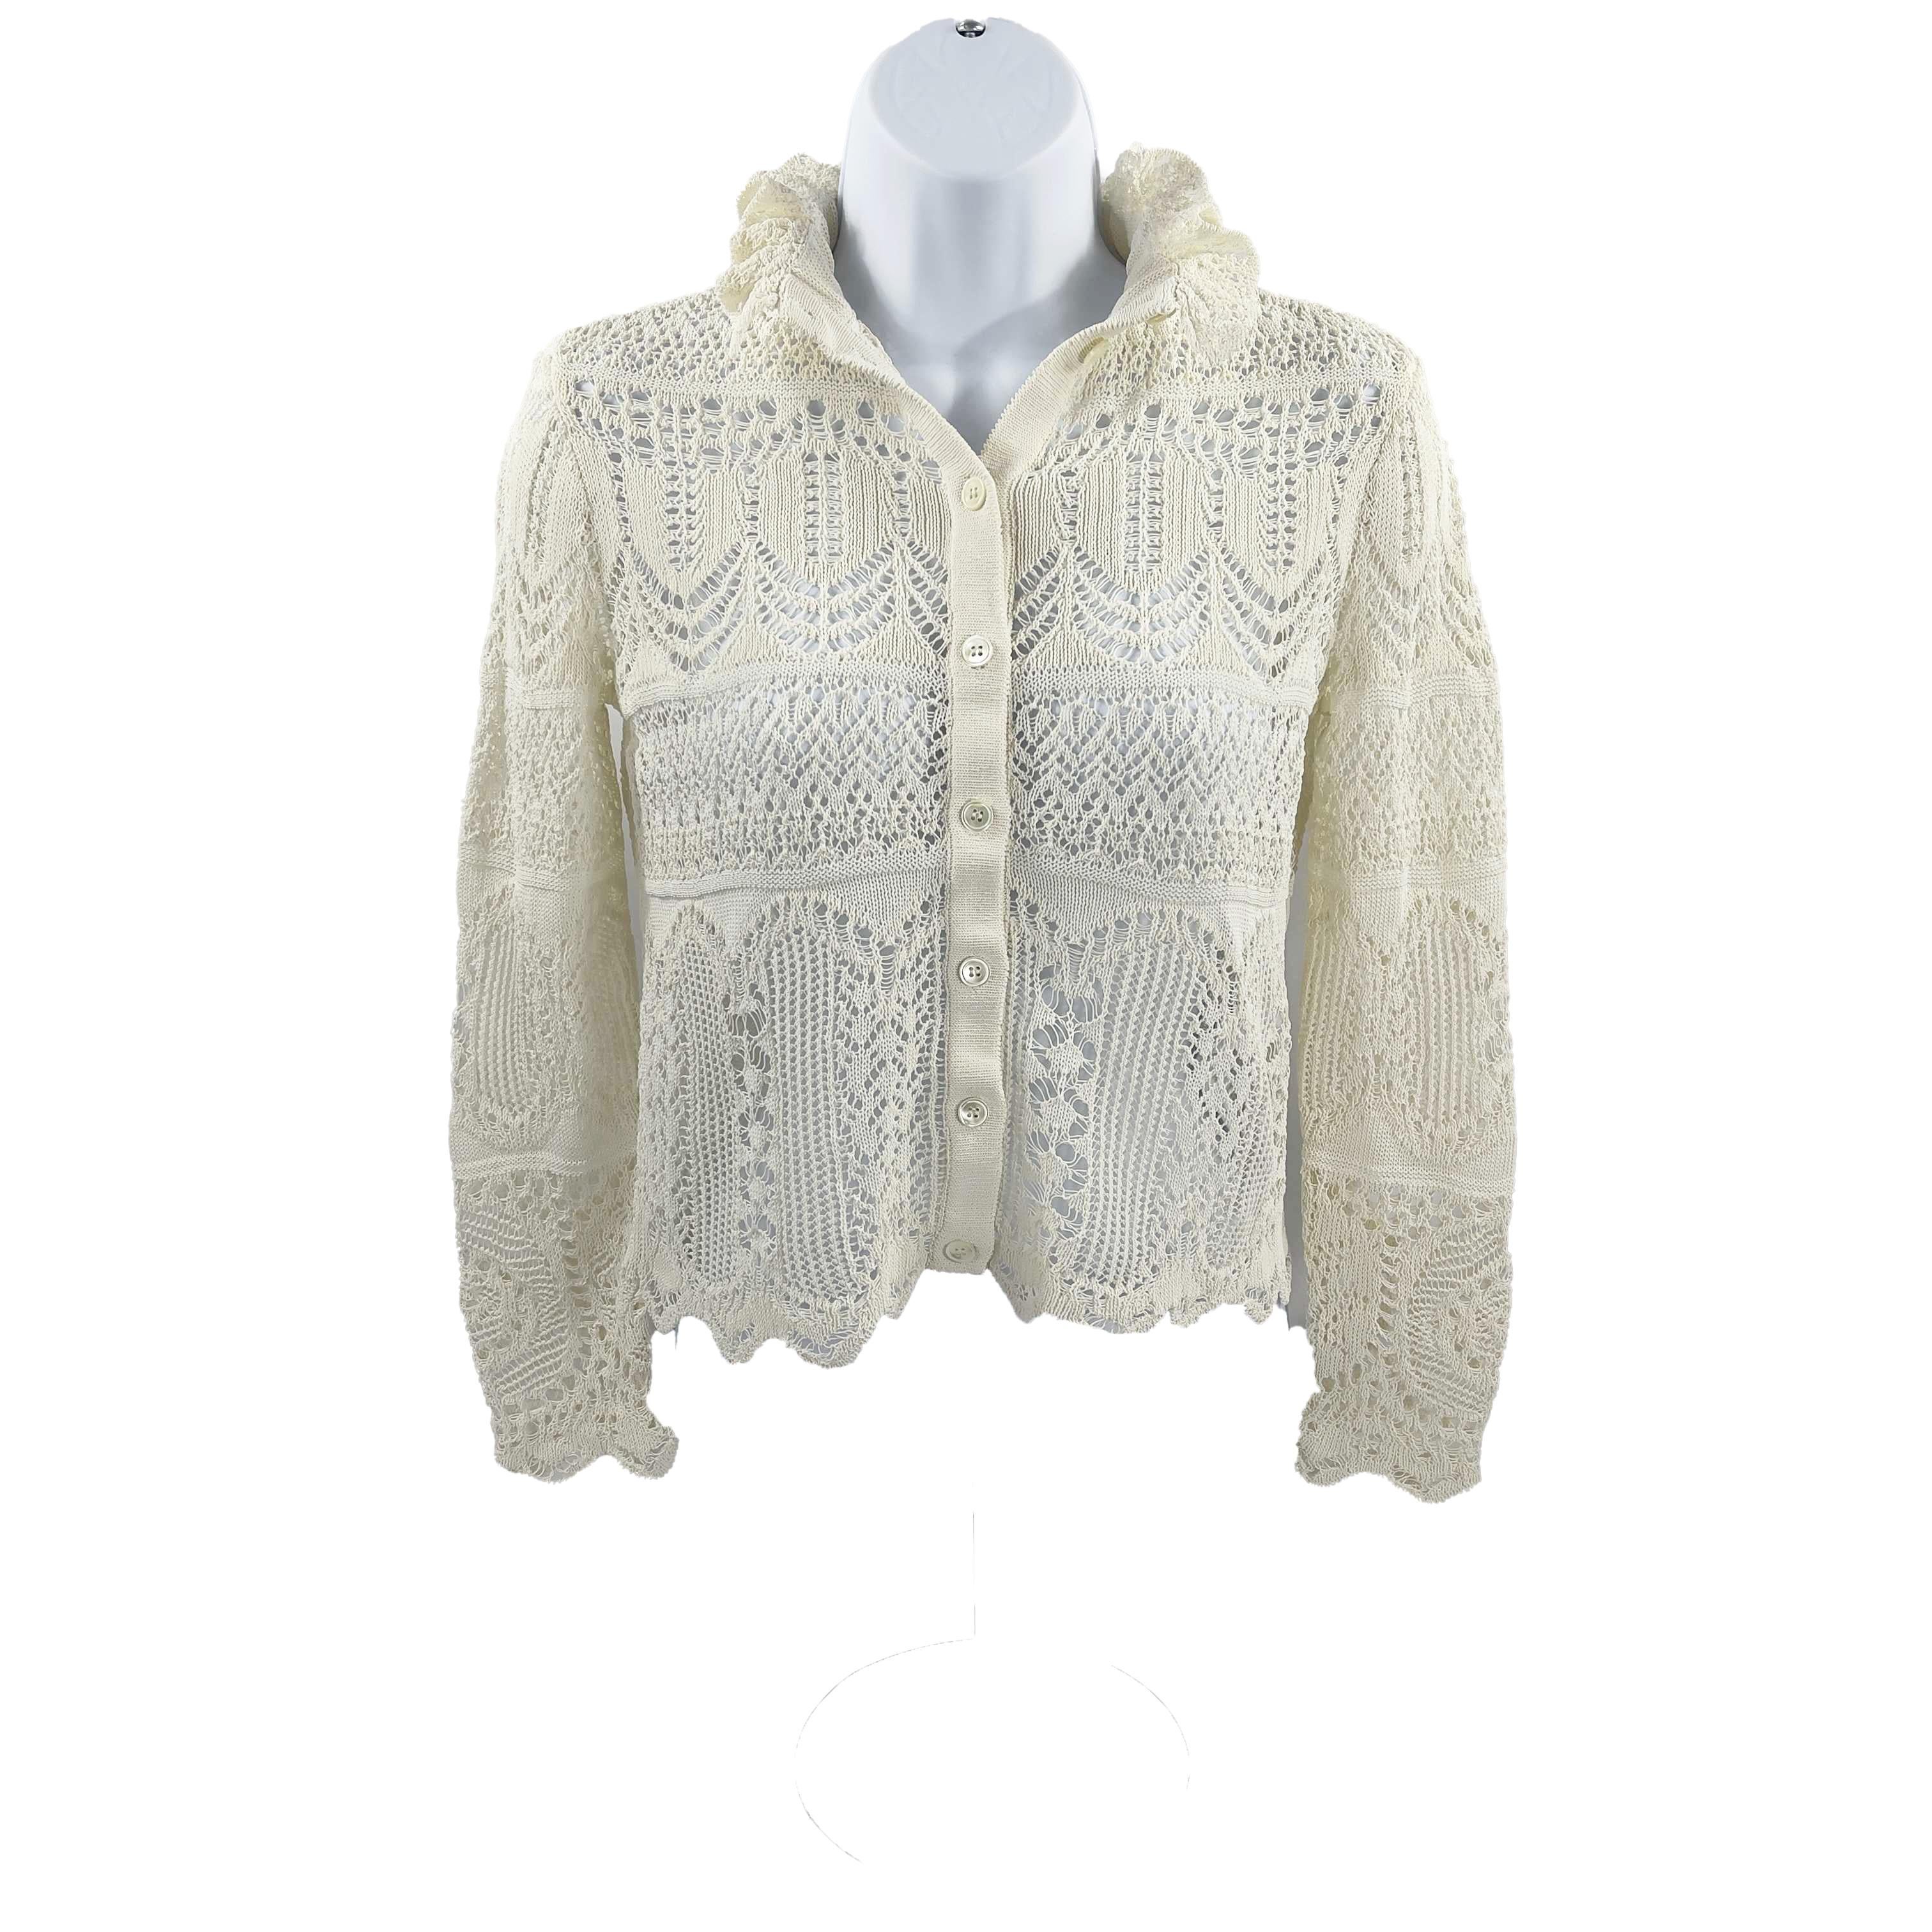 Alexander McQueen Ivory Lace Knit Pointelle Cardigan Sweater Size XS 3